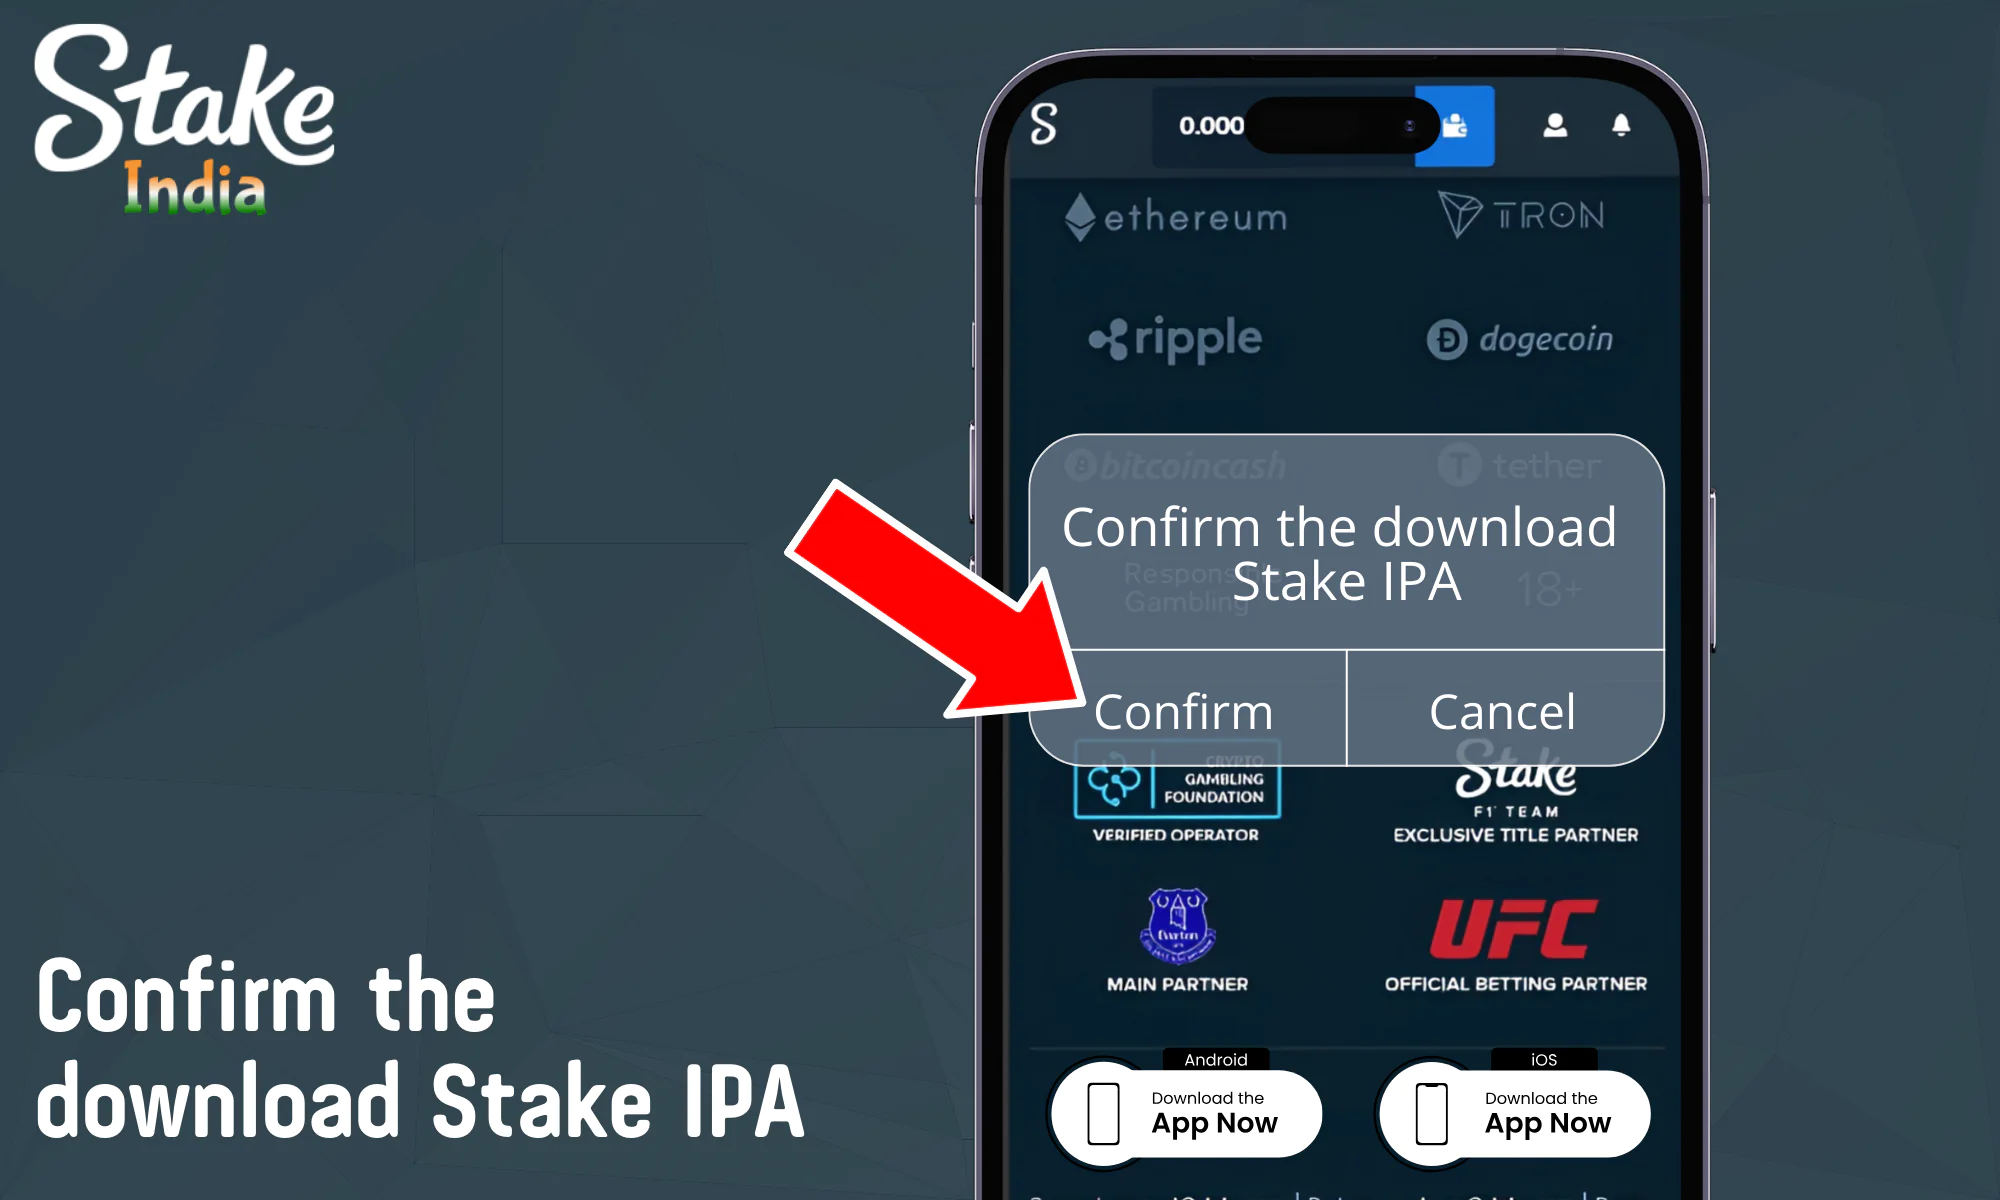 Confirm the download Stake IPA